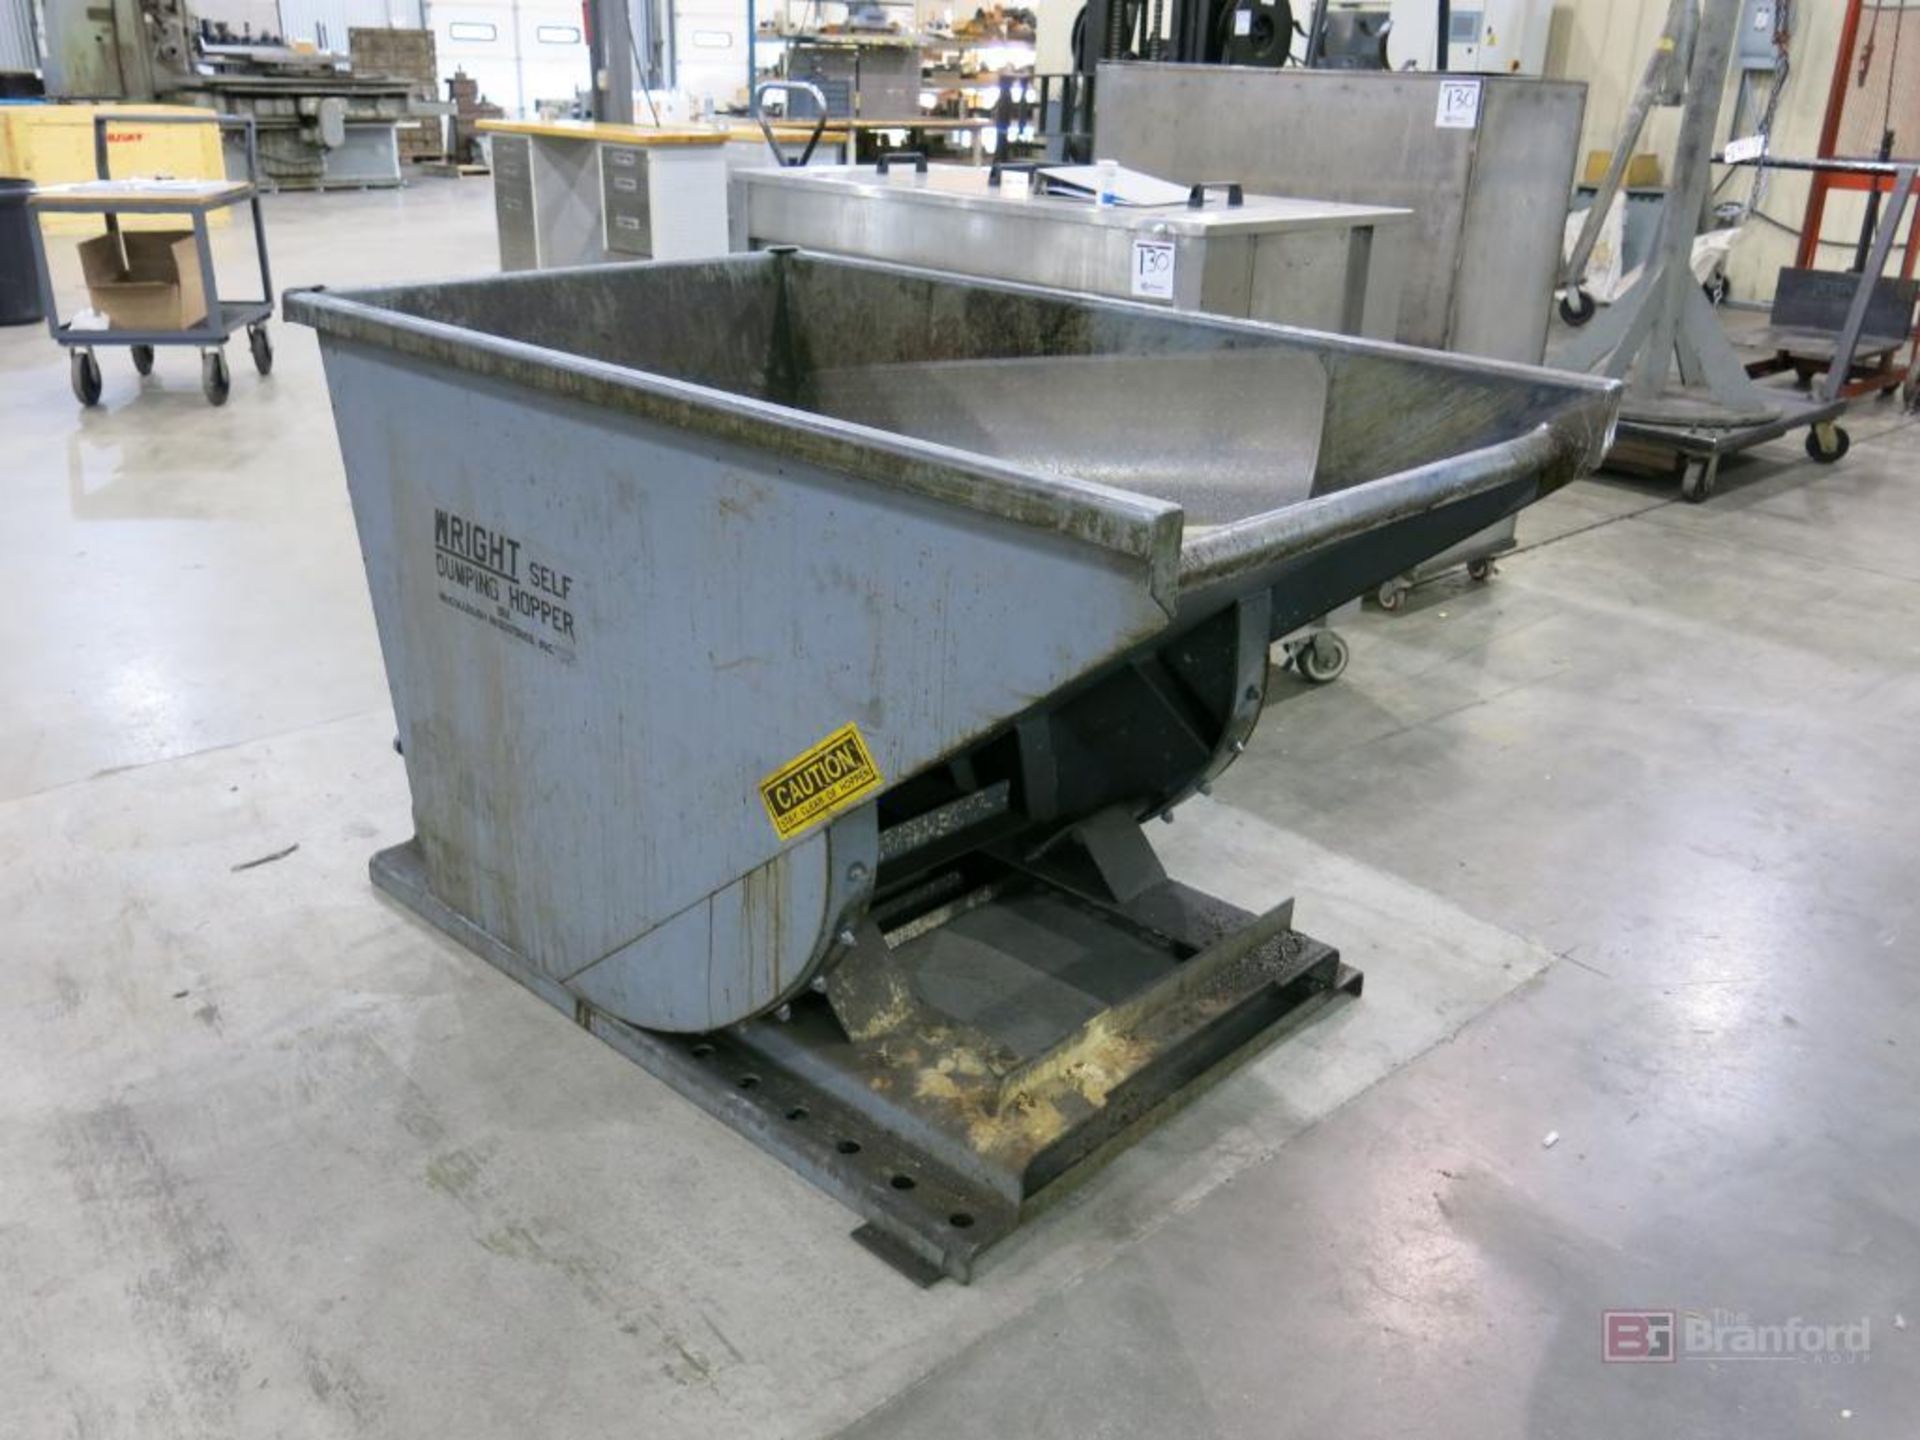 Wright Approx. 1/2-Yard Cap. Forklift Mount Self Dumping Hopper - Image 2 of 2